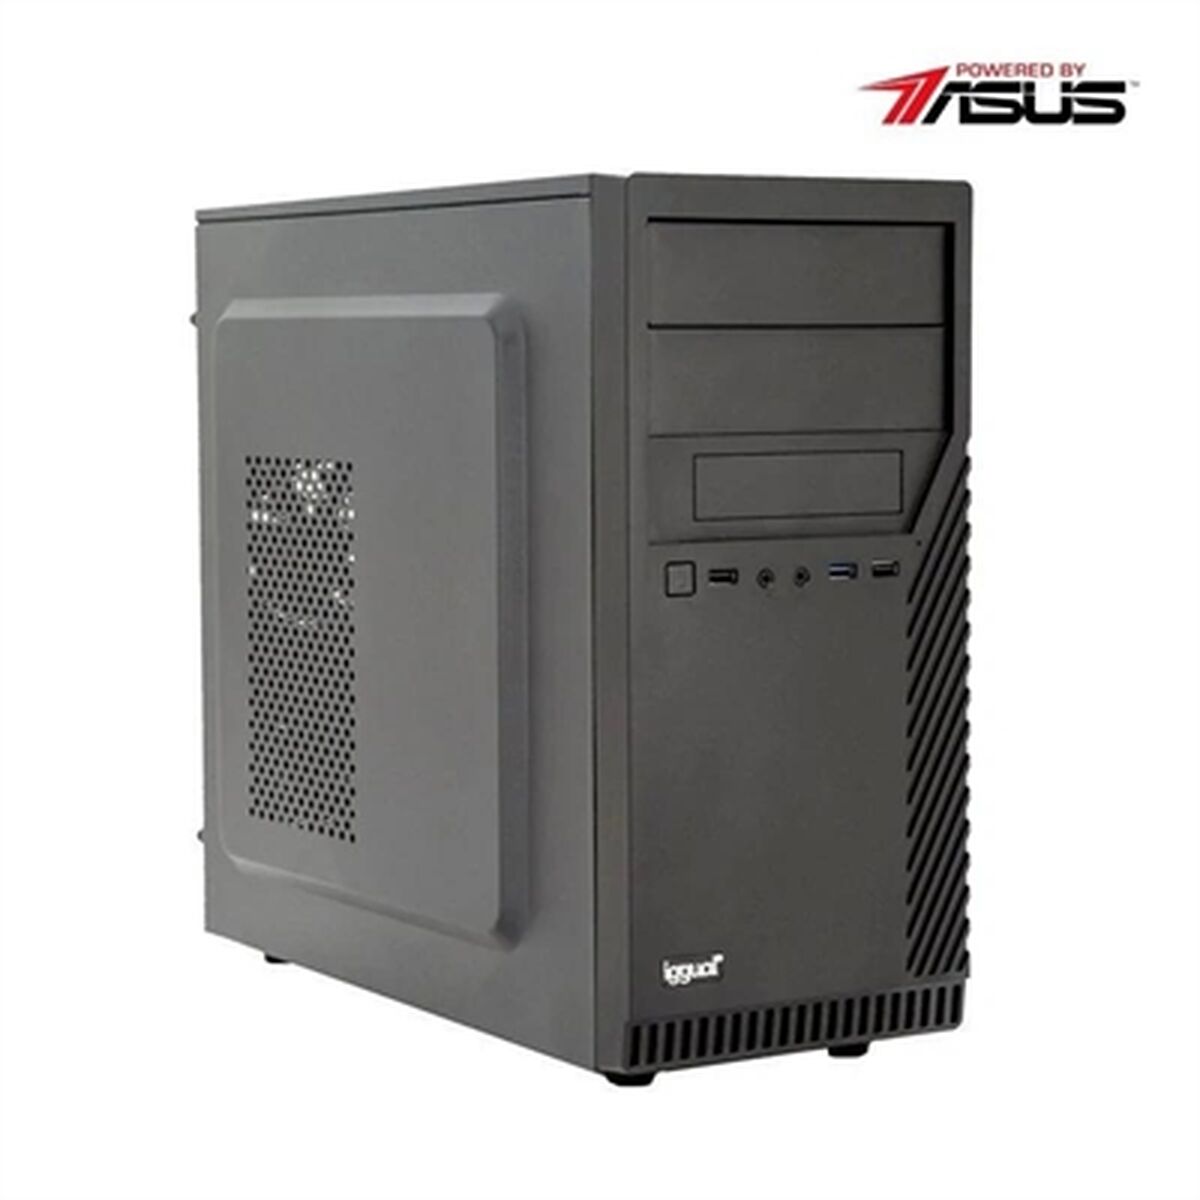 Desktop PC iggual ST PSIPCH709 16 GB RAM 1 TB SSD, iggual, Computing, Desktops, desktop-pc-iggual-st-psipch709-16-gb-ram-1-tb-ssd, Brand_iggual, category-reference-2609, category-reference-2791, category-reference-2792, category-reference-t-19685, category-reference-t-19903, category-reference-t-21381, computers / components, Condition_NEW, office, Price_600 - 700, Teleworking, RiotNook